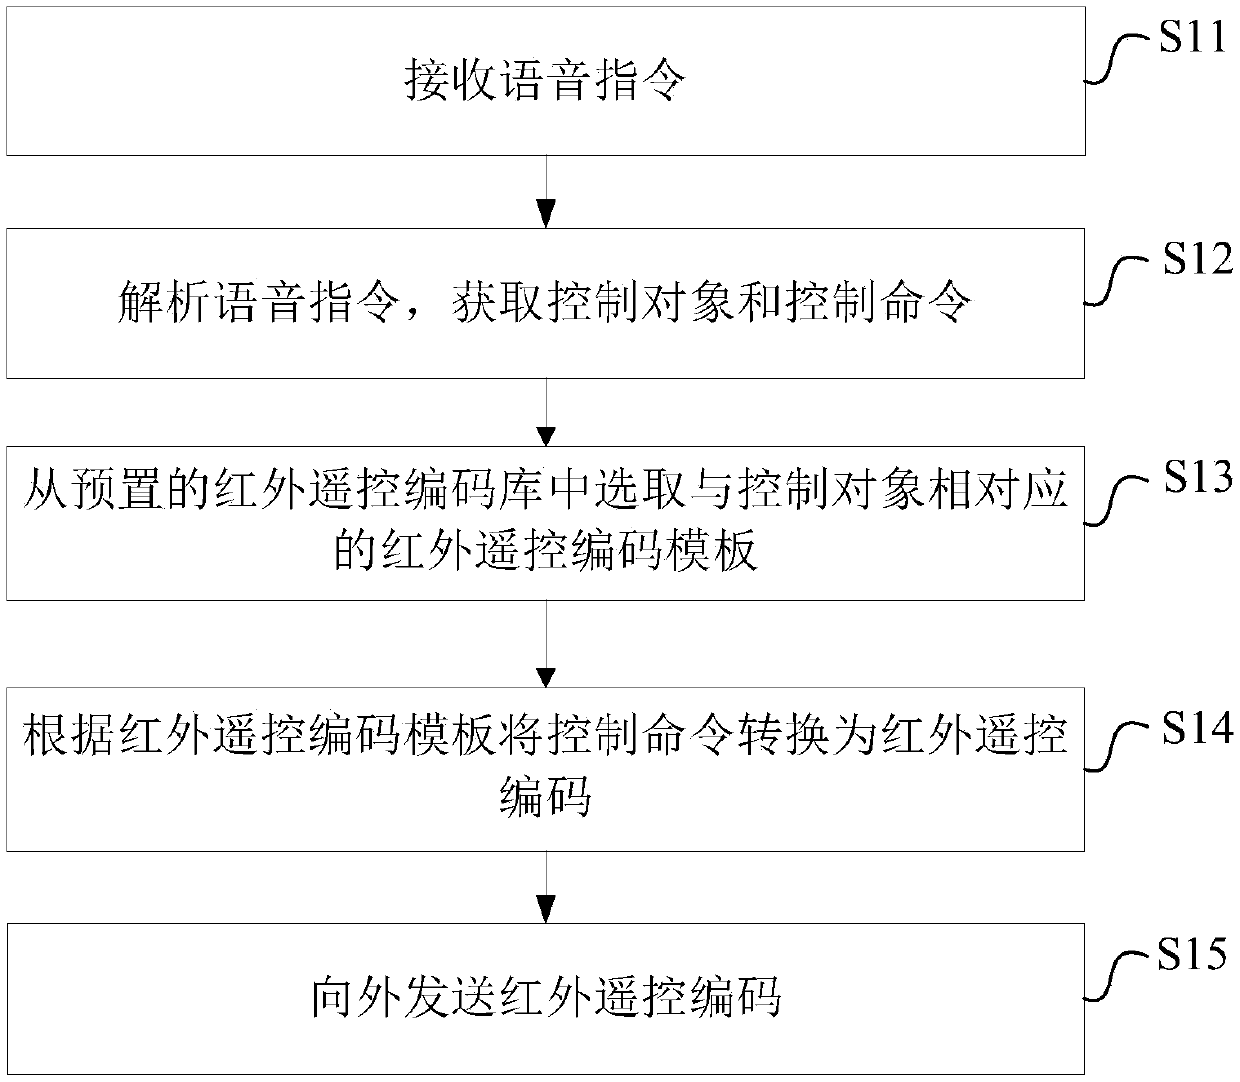 Speech remote control method and device